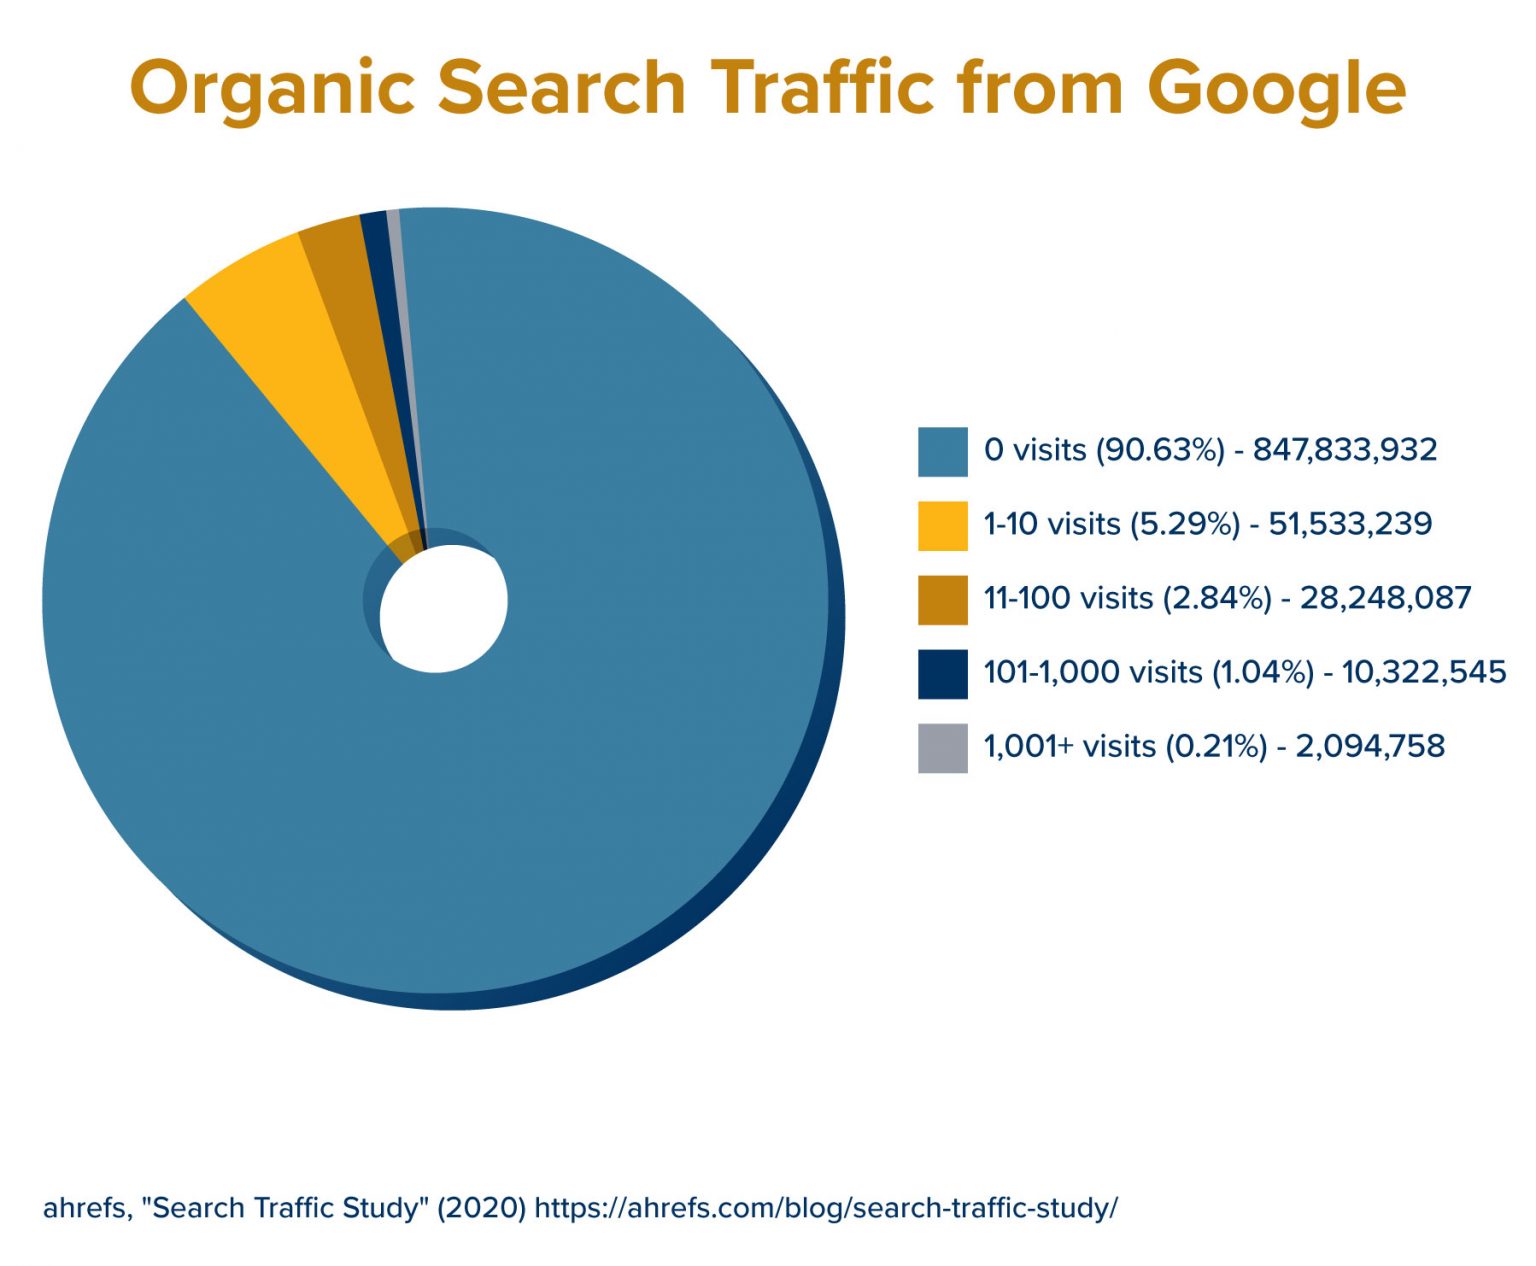 Benefits of organic traffic for small businesses